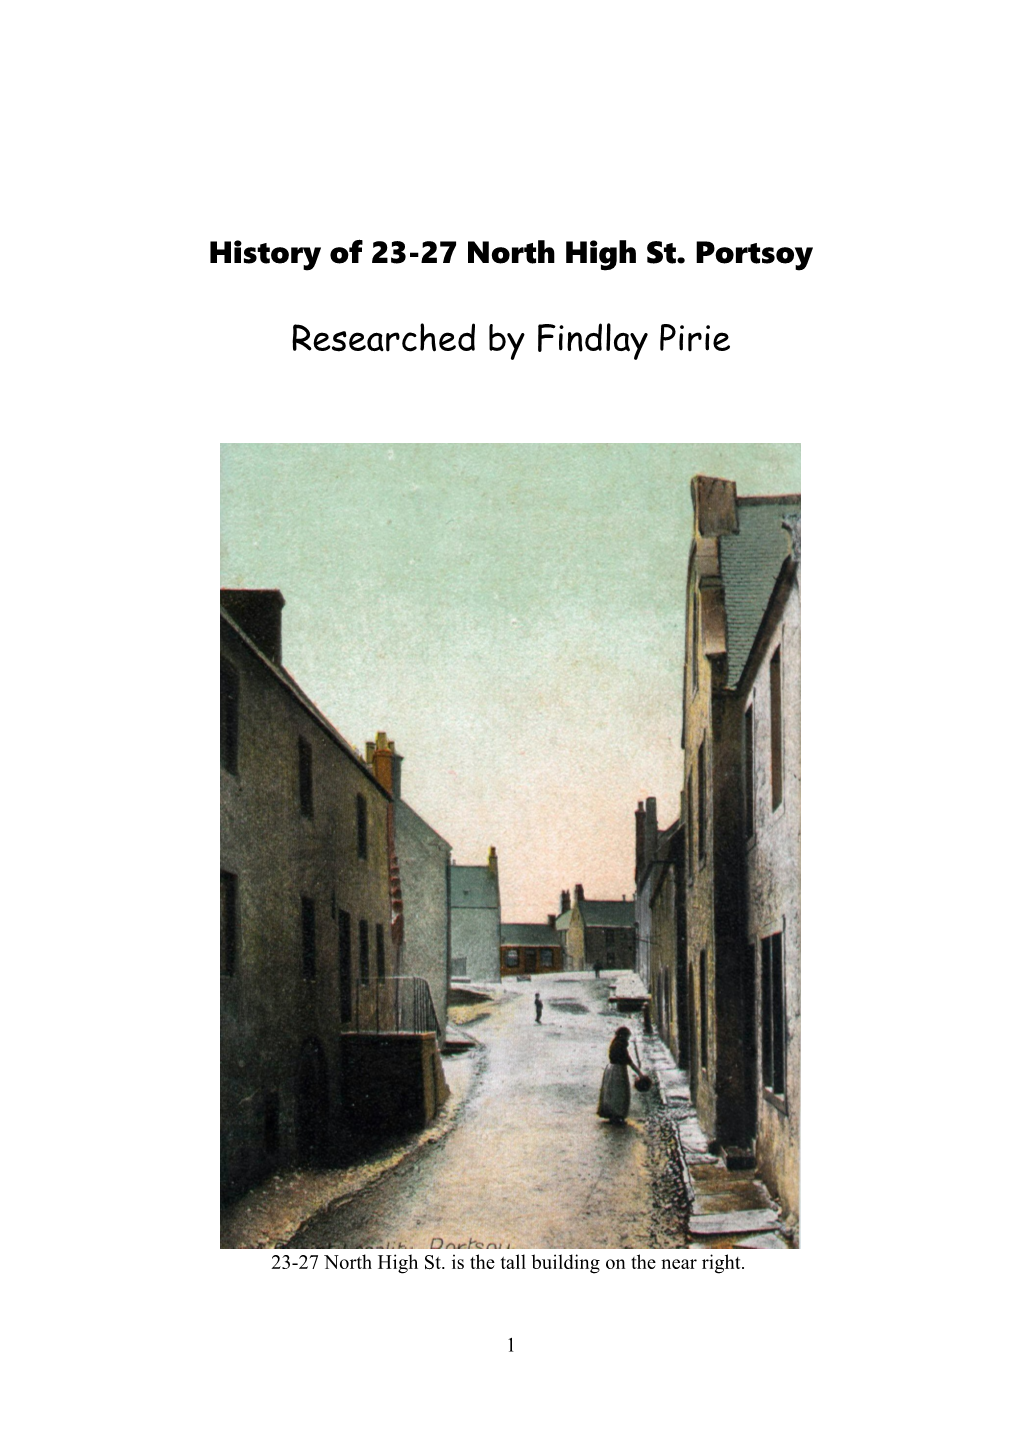 History of 23-27 North High St